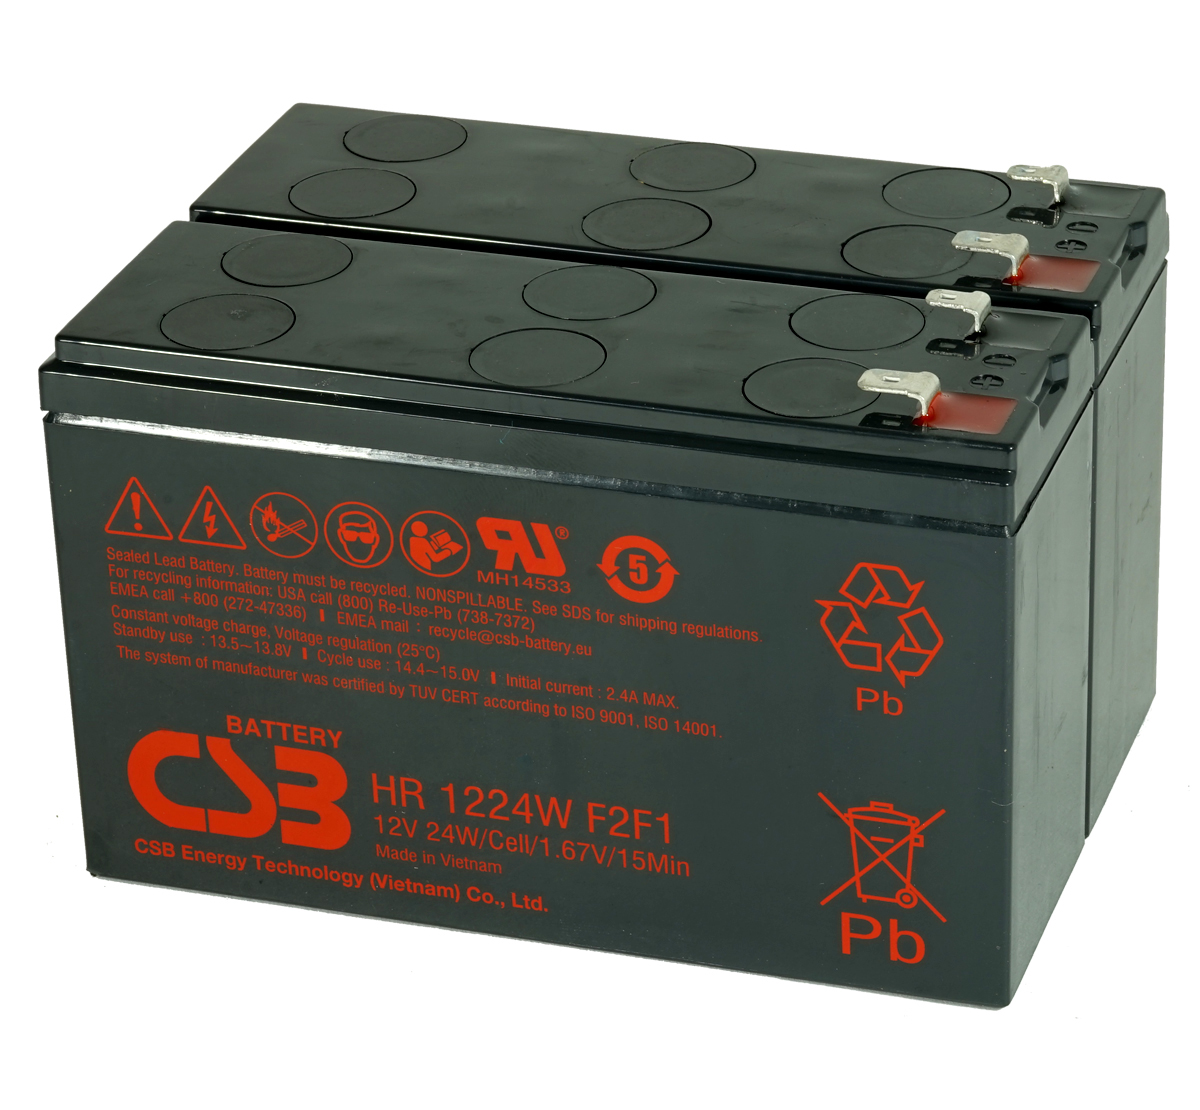 MDS1001 UPS Battery Kit for MGE AB1001